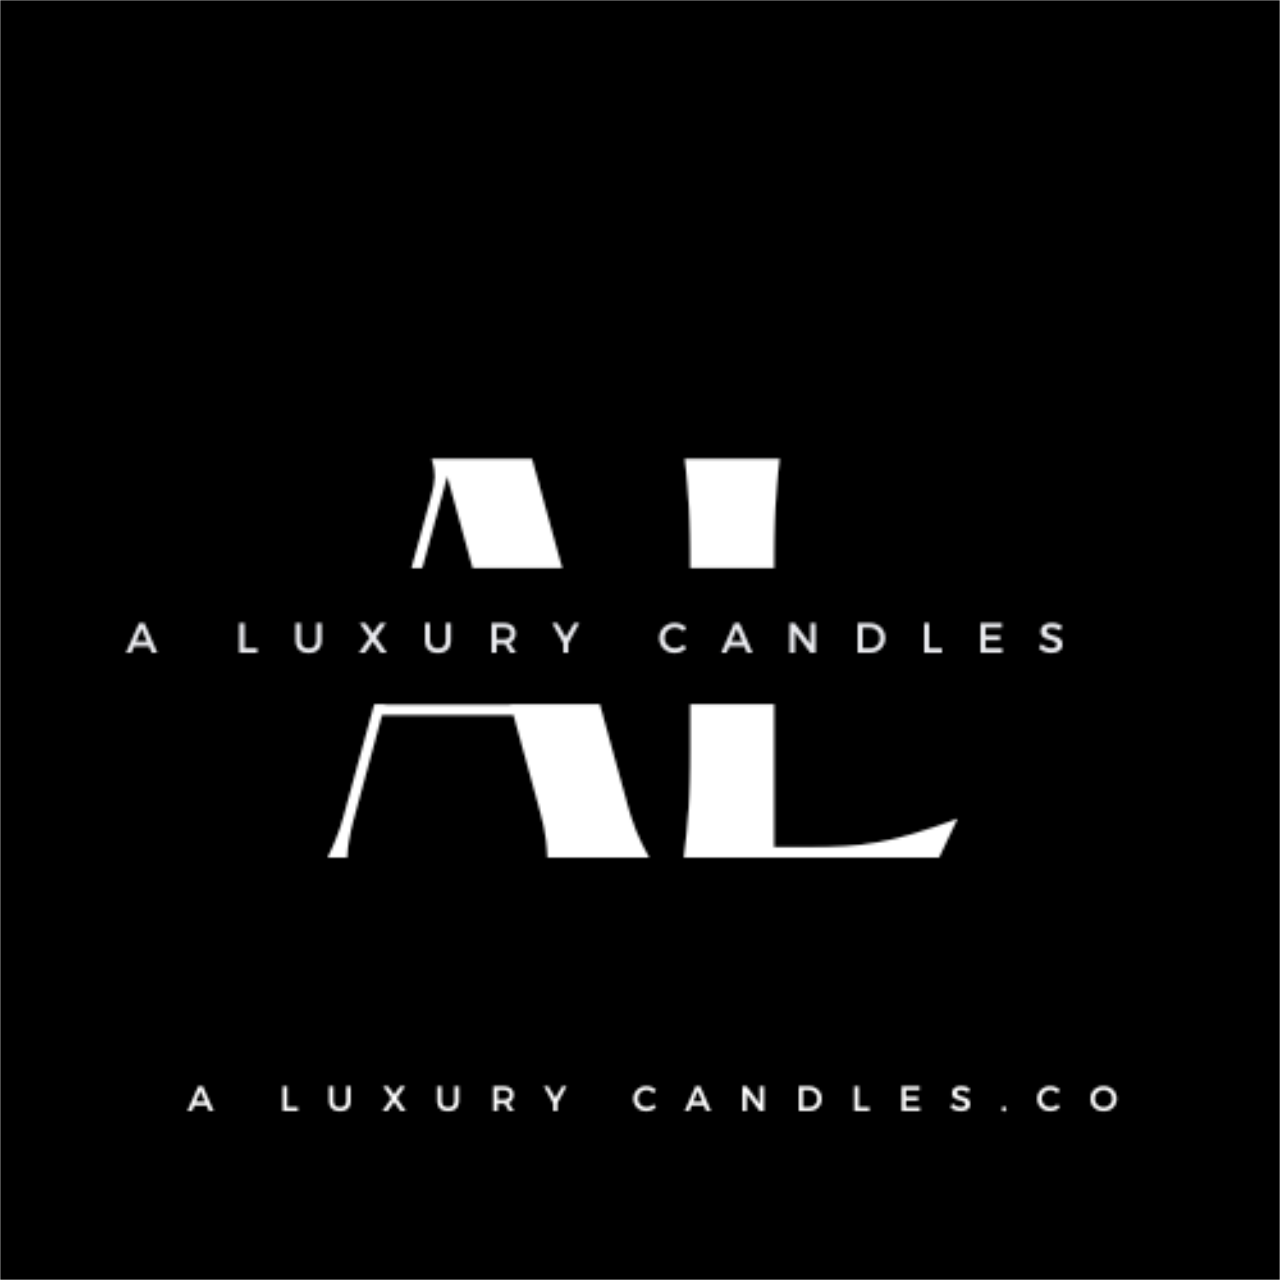 A LUXURY CANDLES's web page